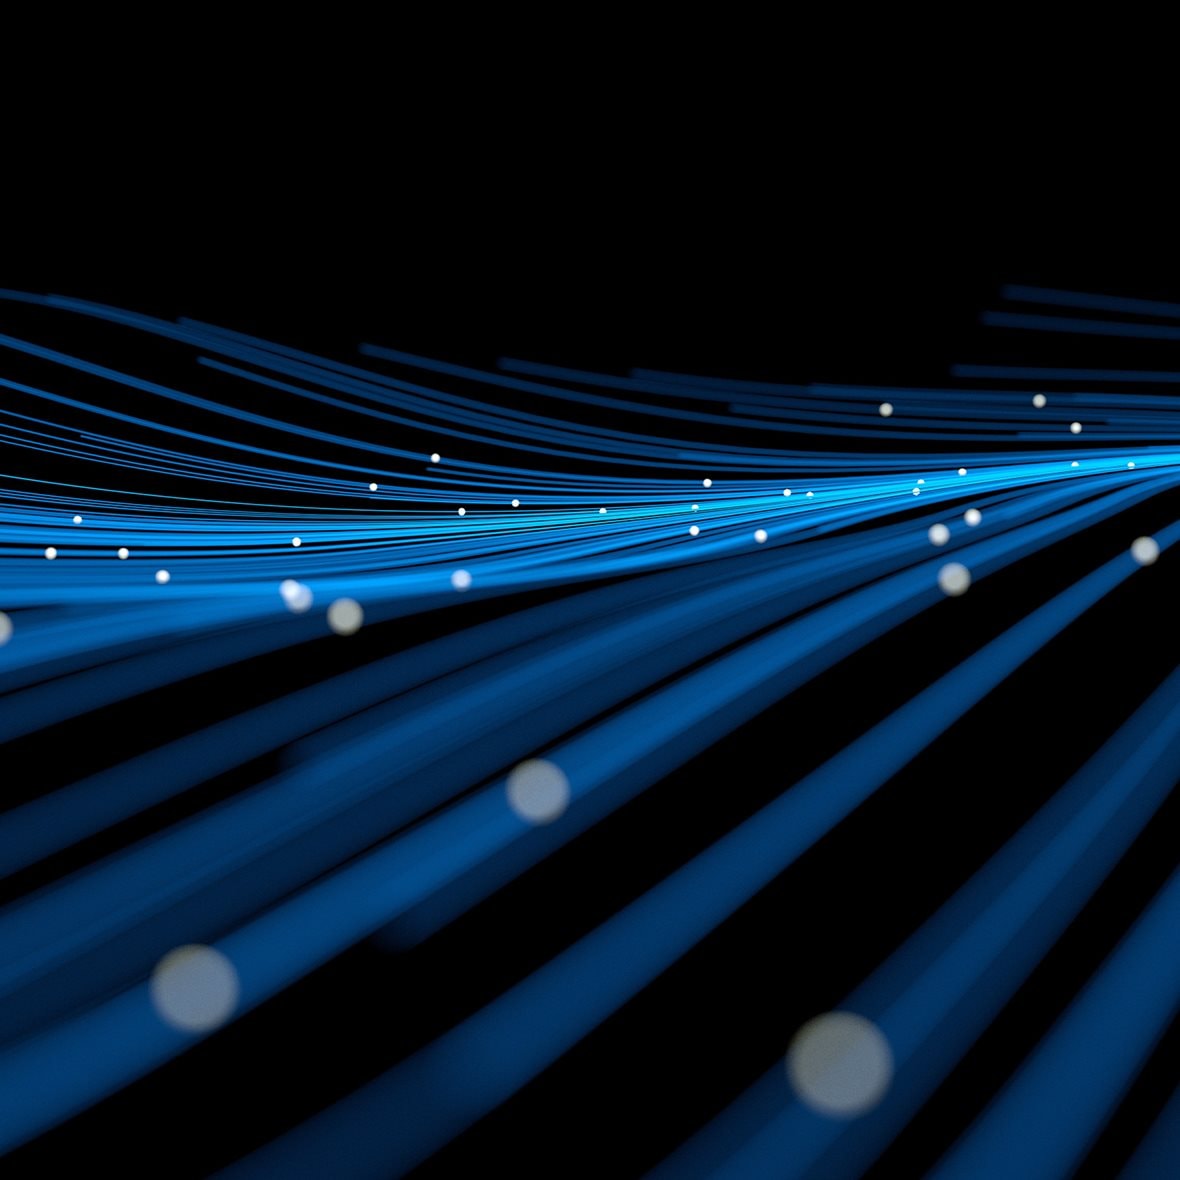 Blue technology background of undulating lines with glowing orbs floating above. - stock photo